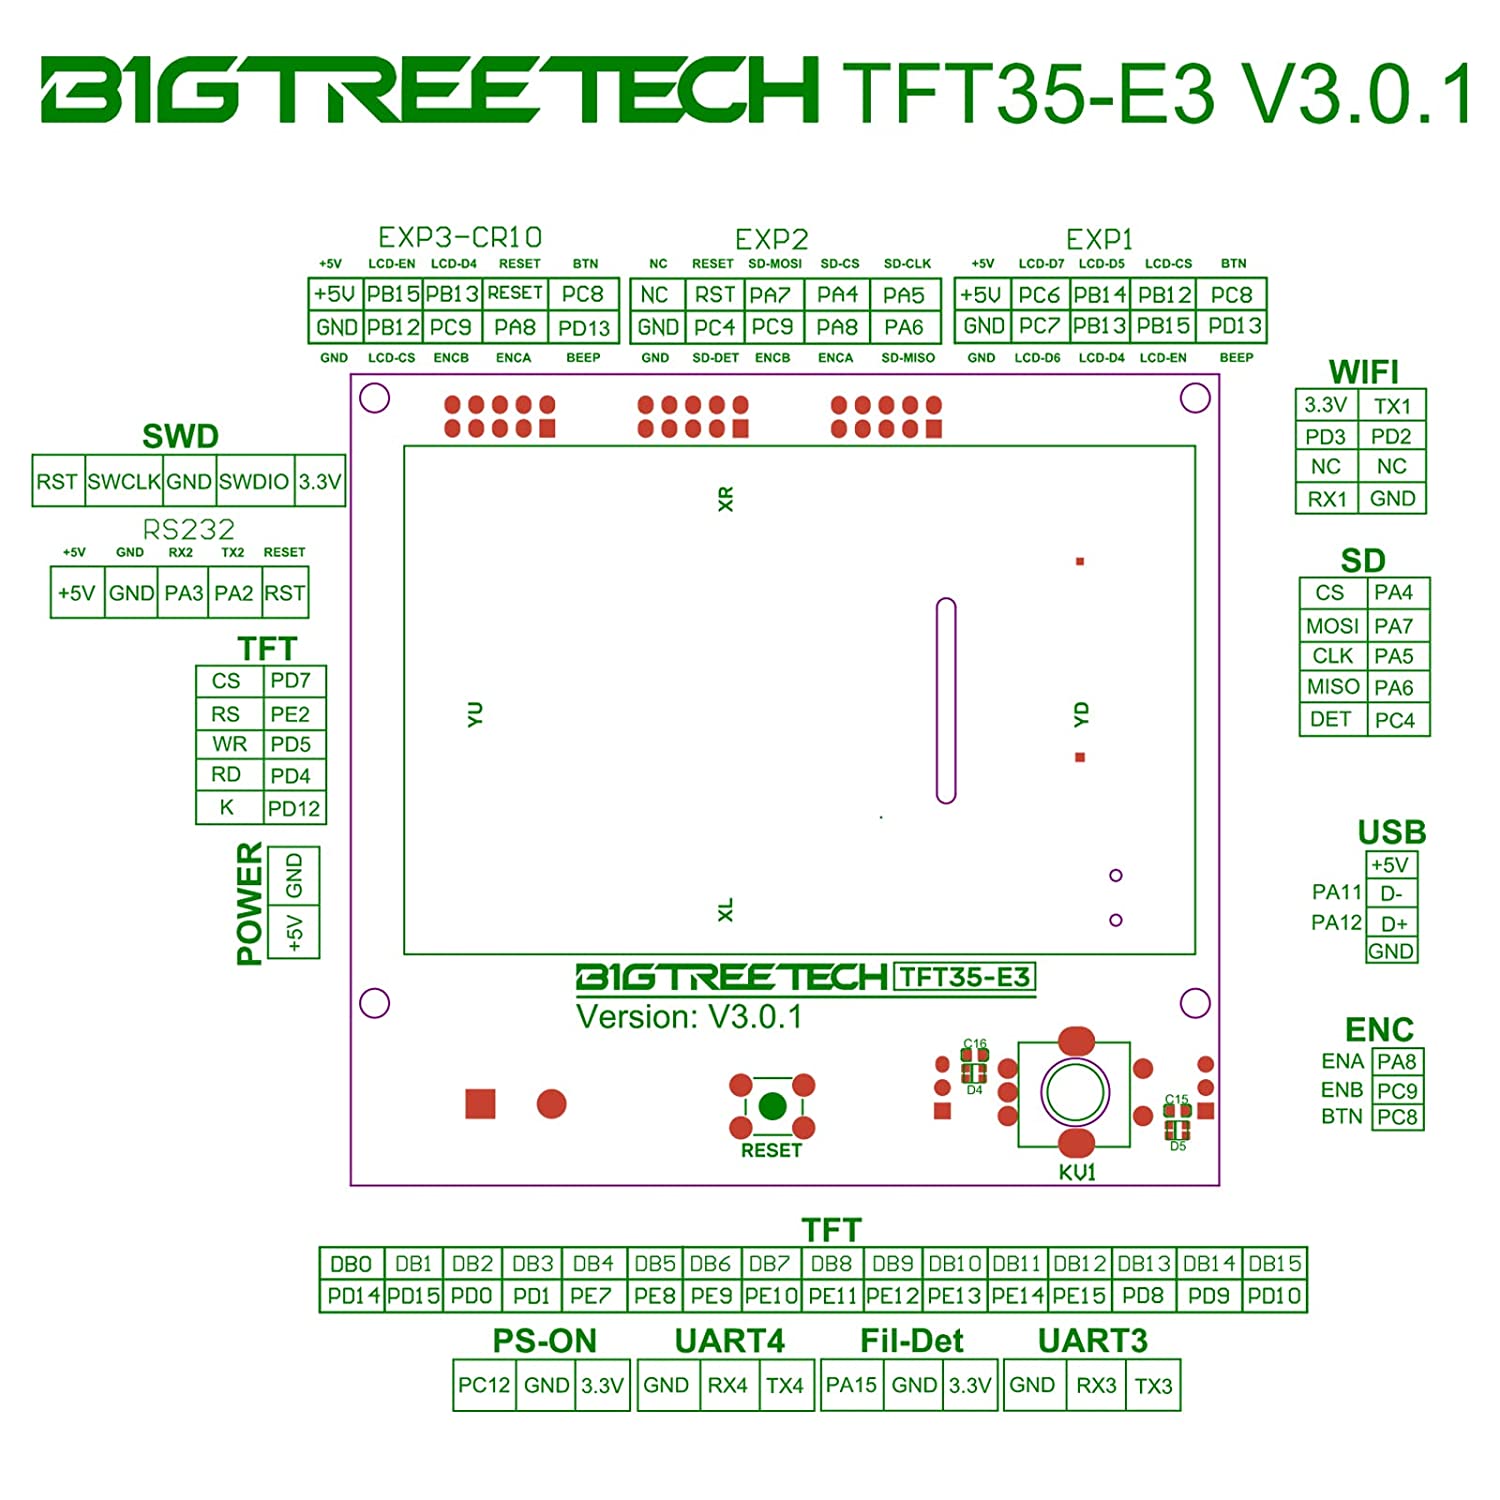 BIGTREETECH TFT35 E3 V3.0.1 Touch Screen Display